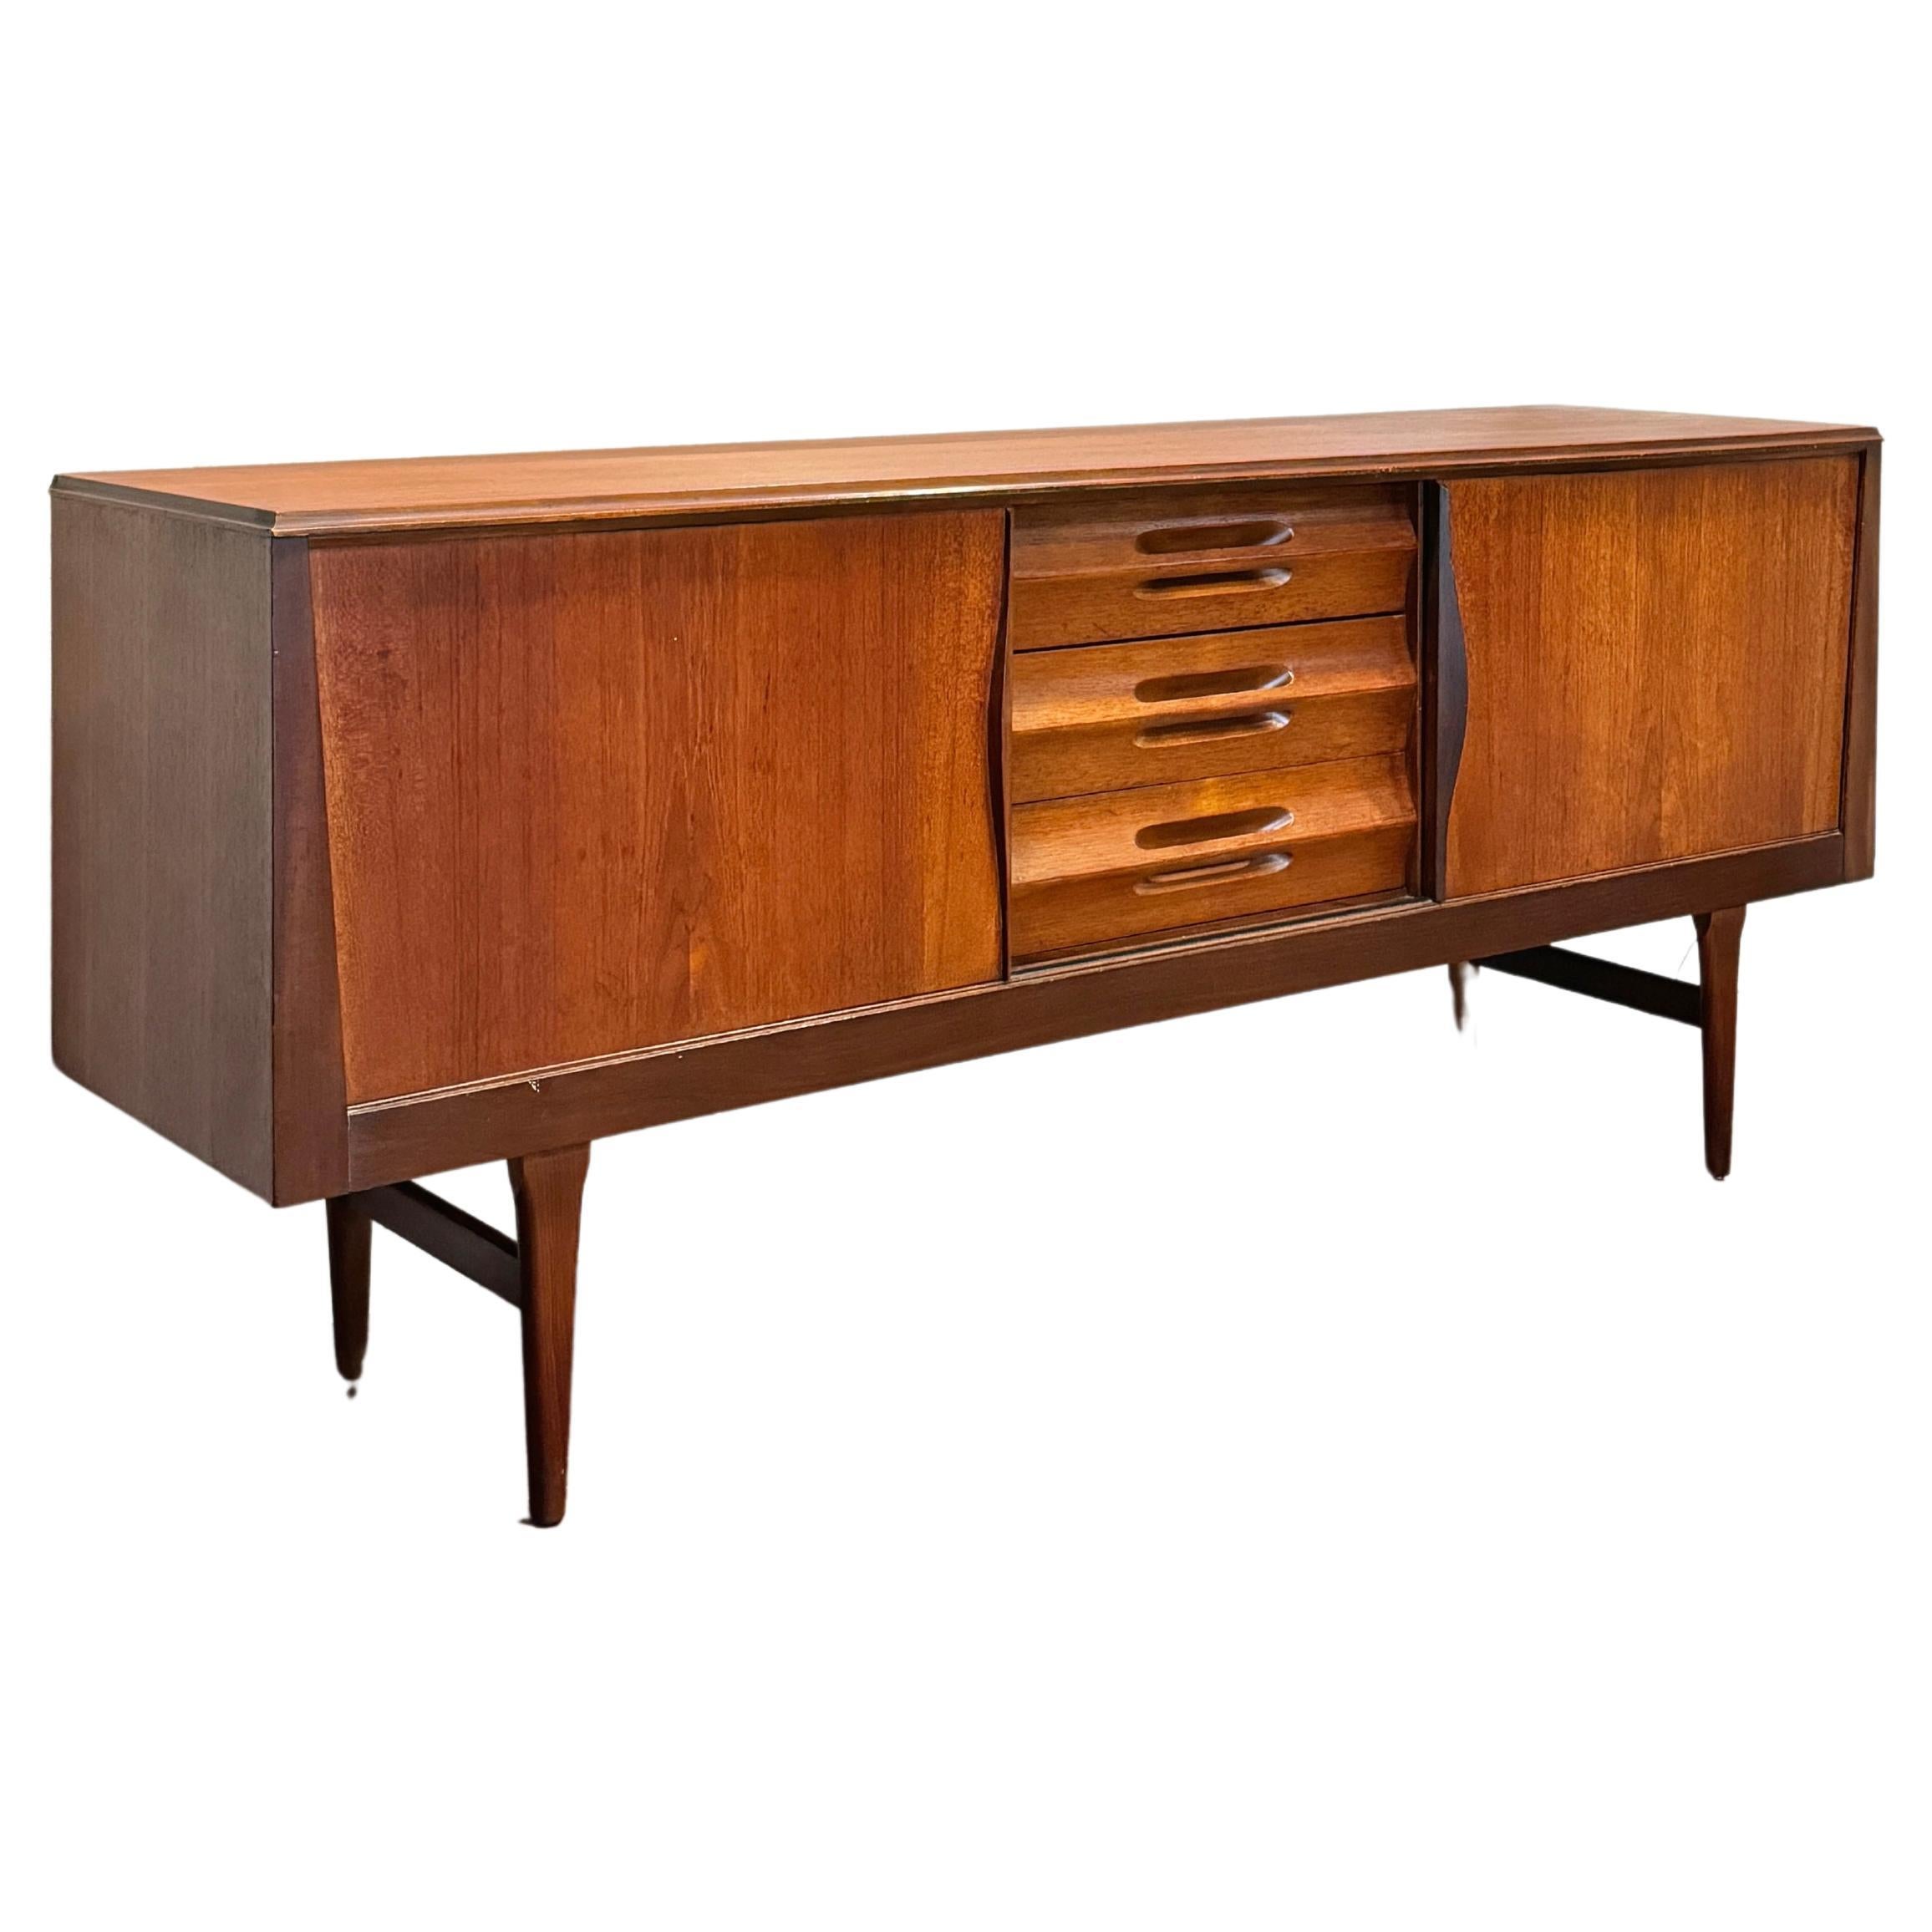 Mid century modern sideboard made of teak, circa 1960’s For Sale